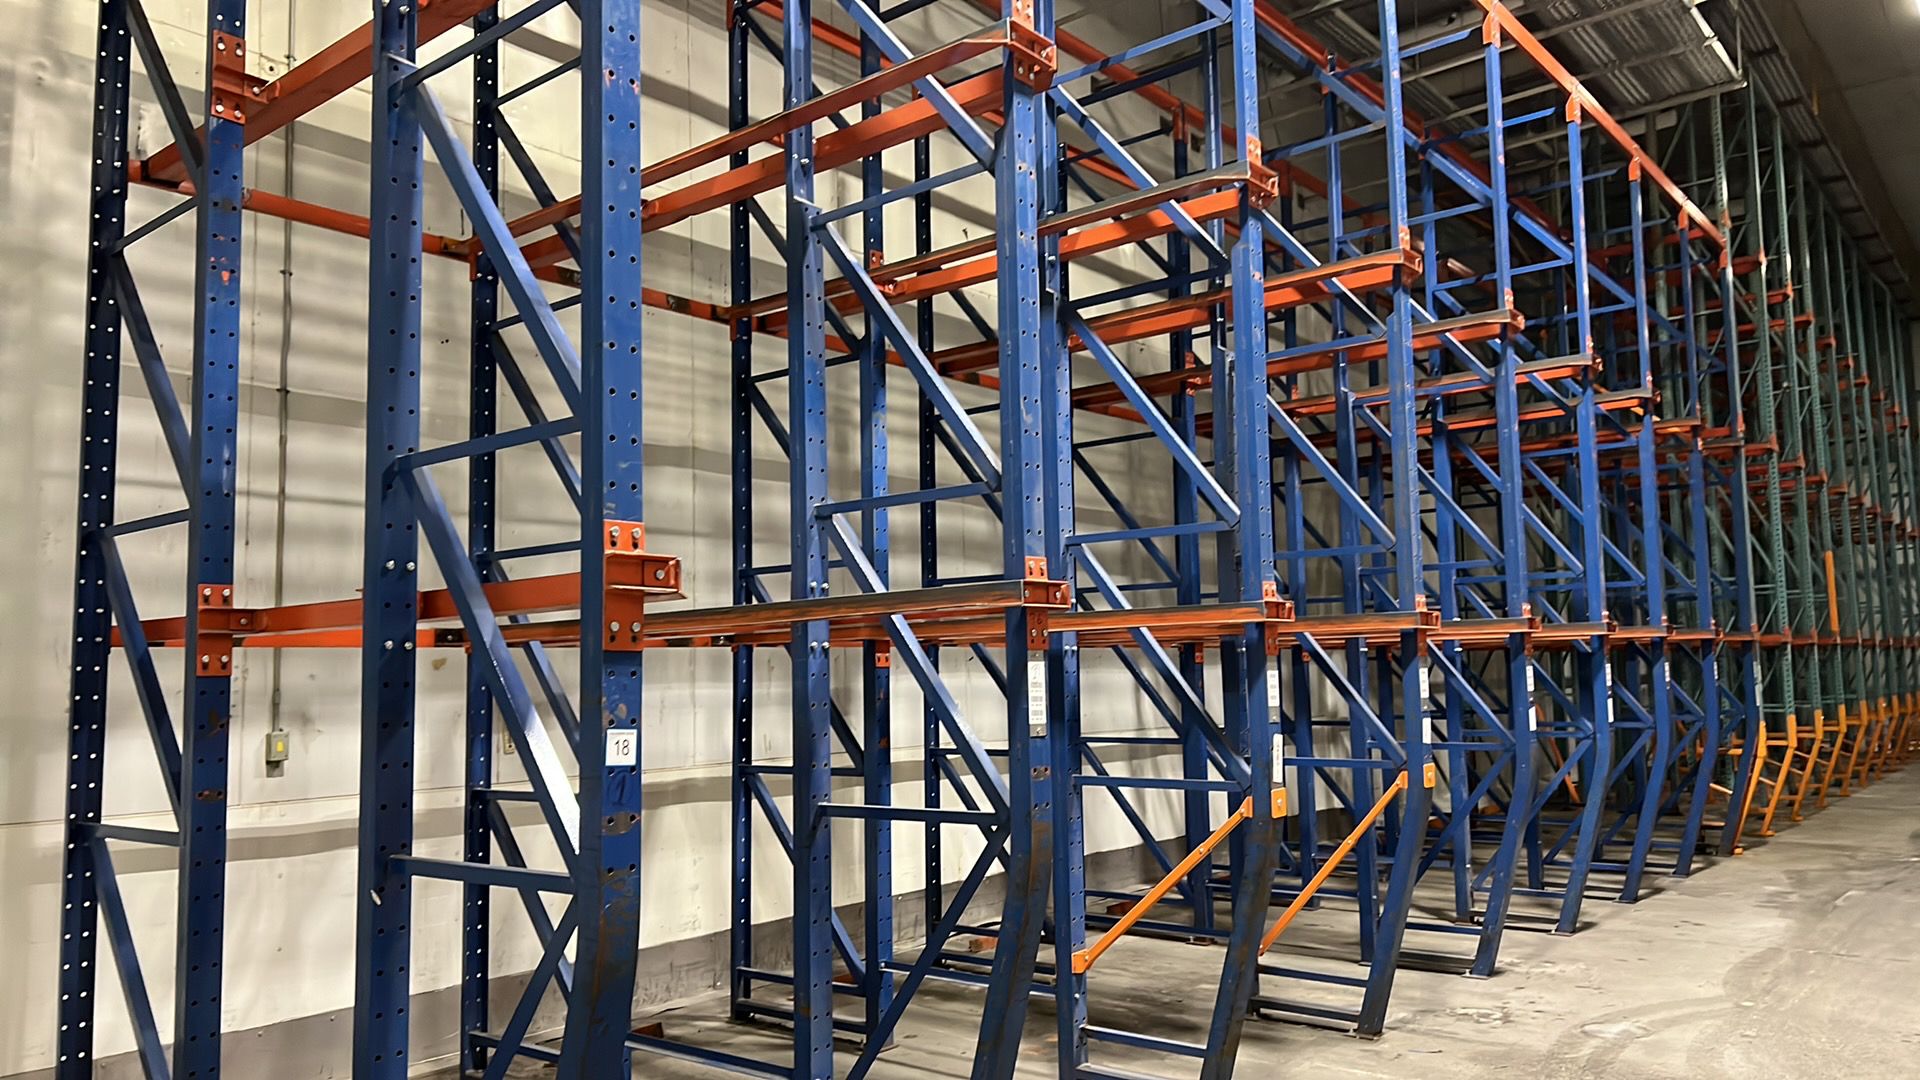 Drive Racking System 36 Rows/1500 Bays, (400) 22/25' Uprights (250) Rail Sections, (500+) Top Beams. - Image 7 of 14